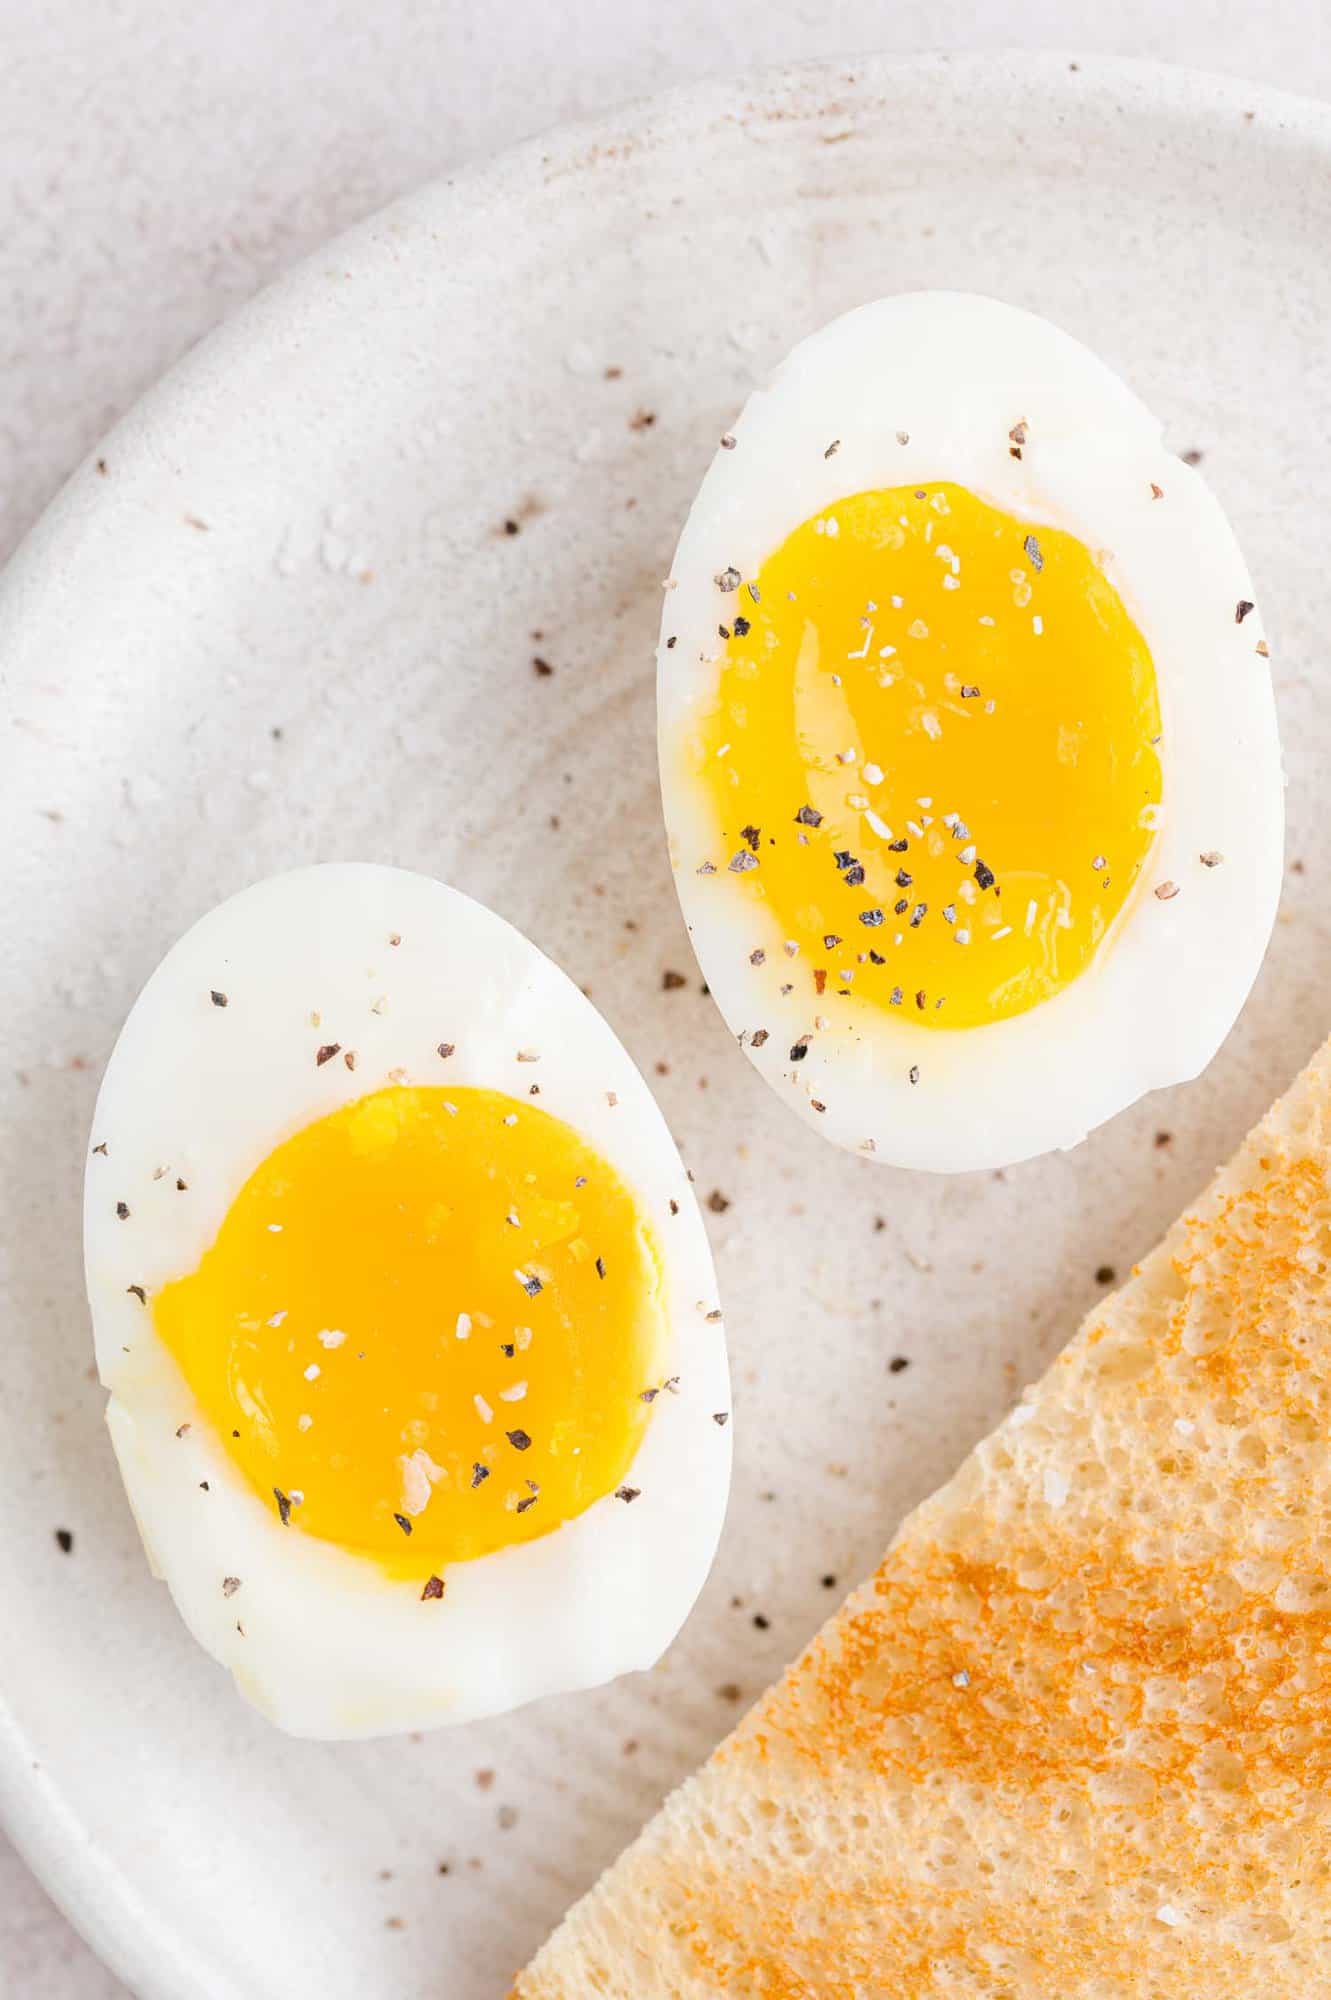 Close up of two halves of a boiled egg on a plate, seasoned with salt and pepper next to a slice of toast.